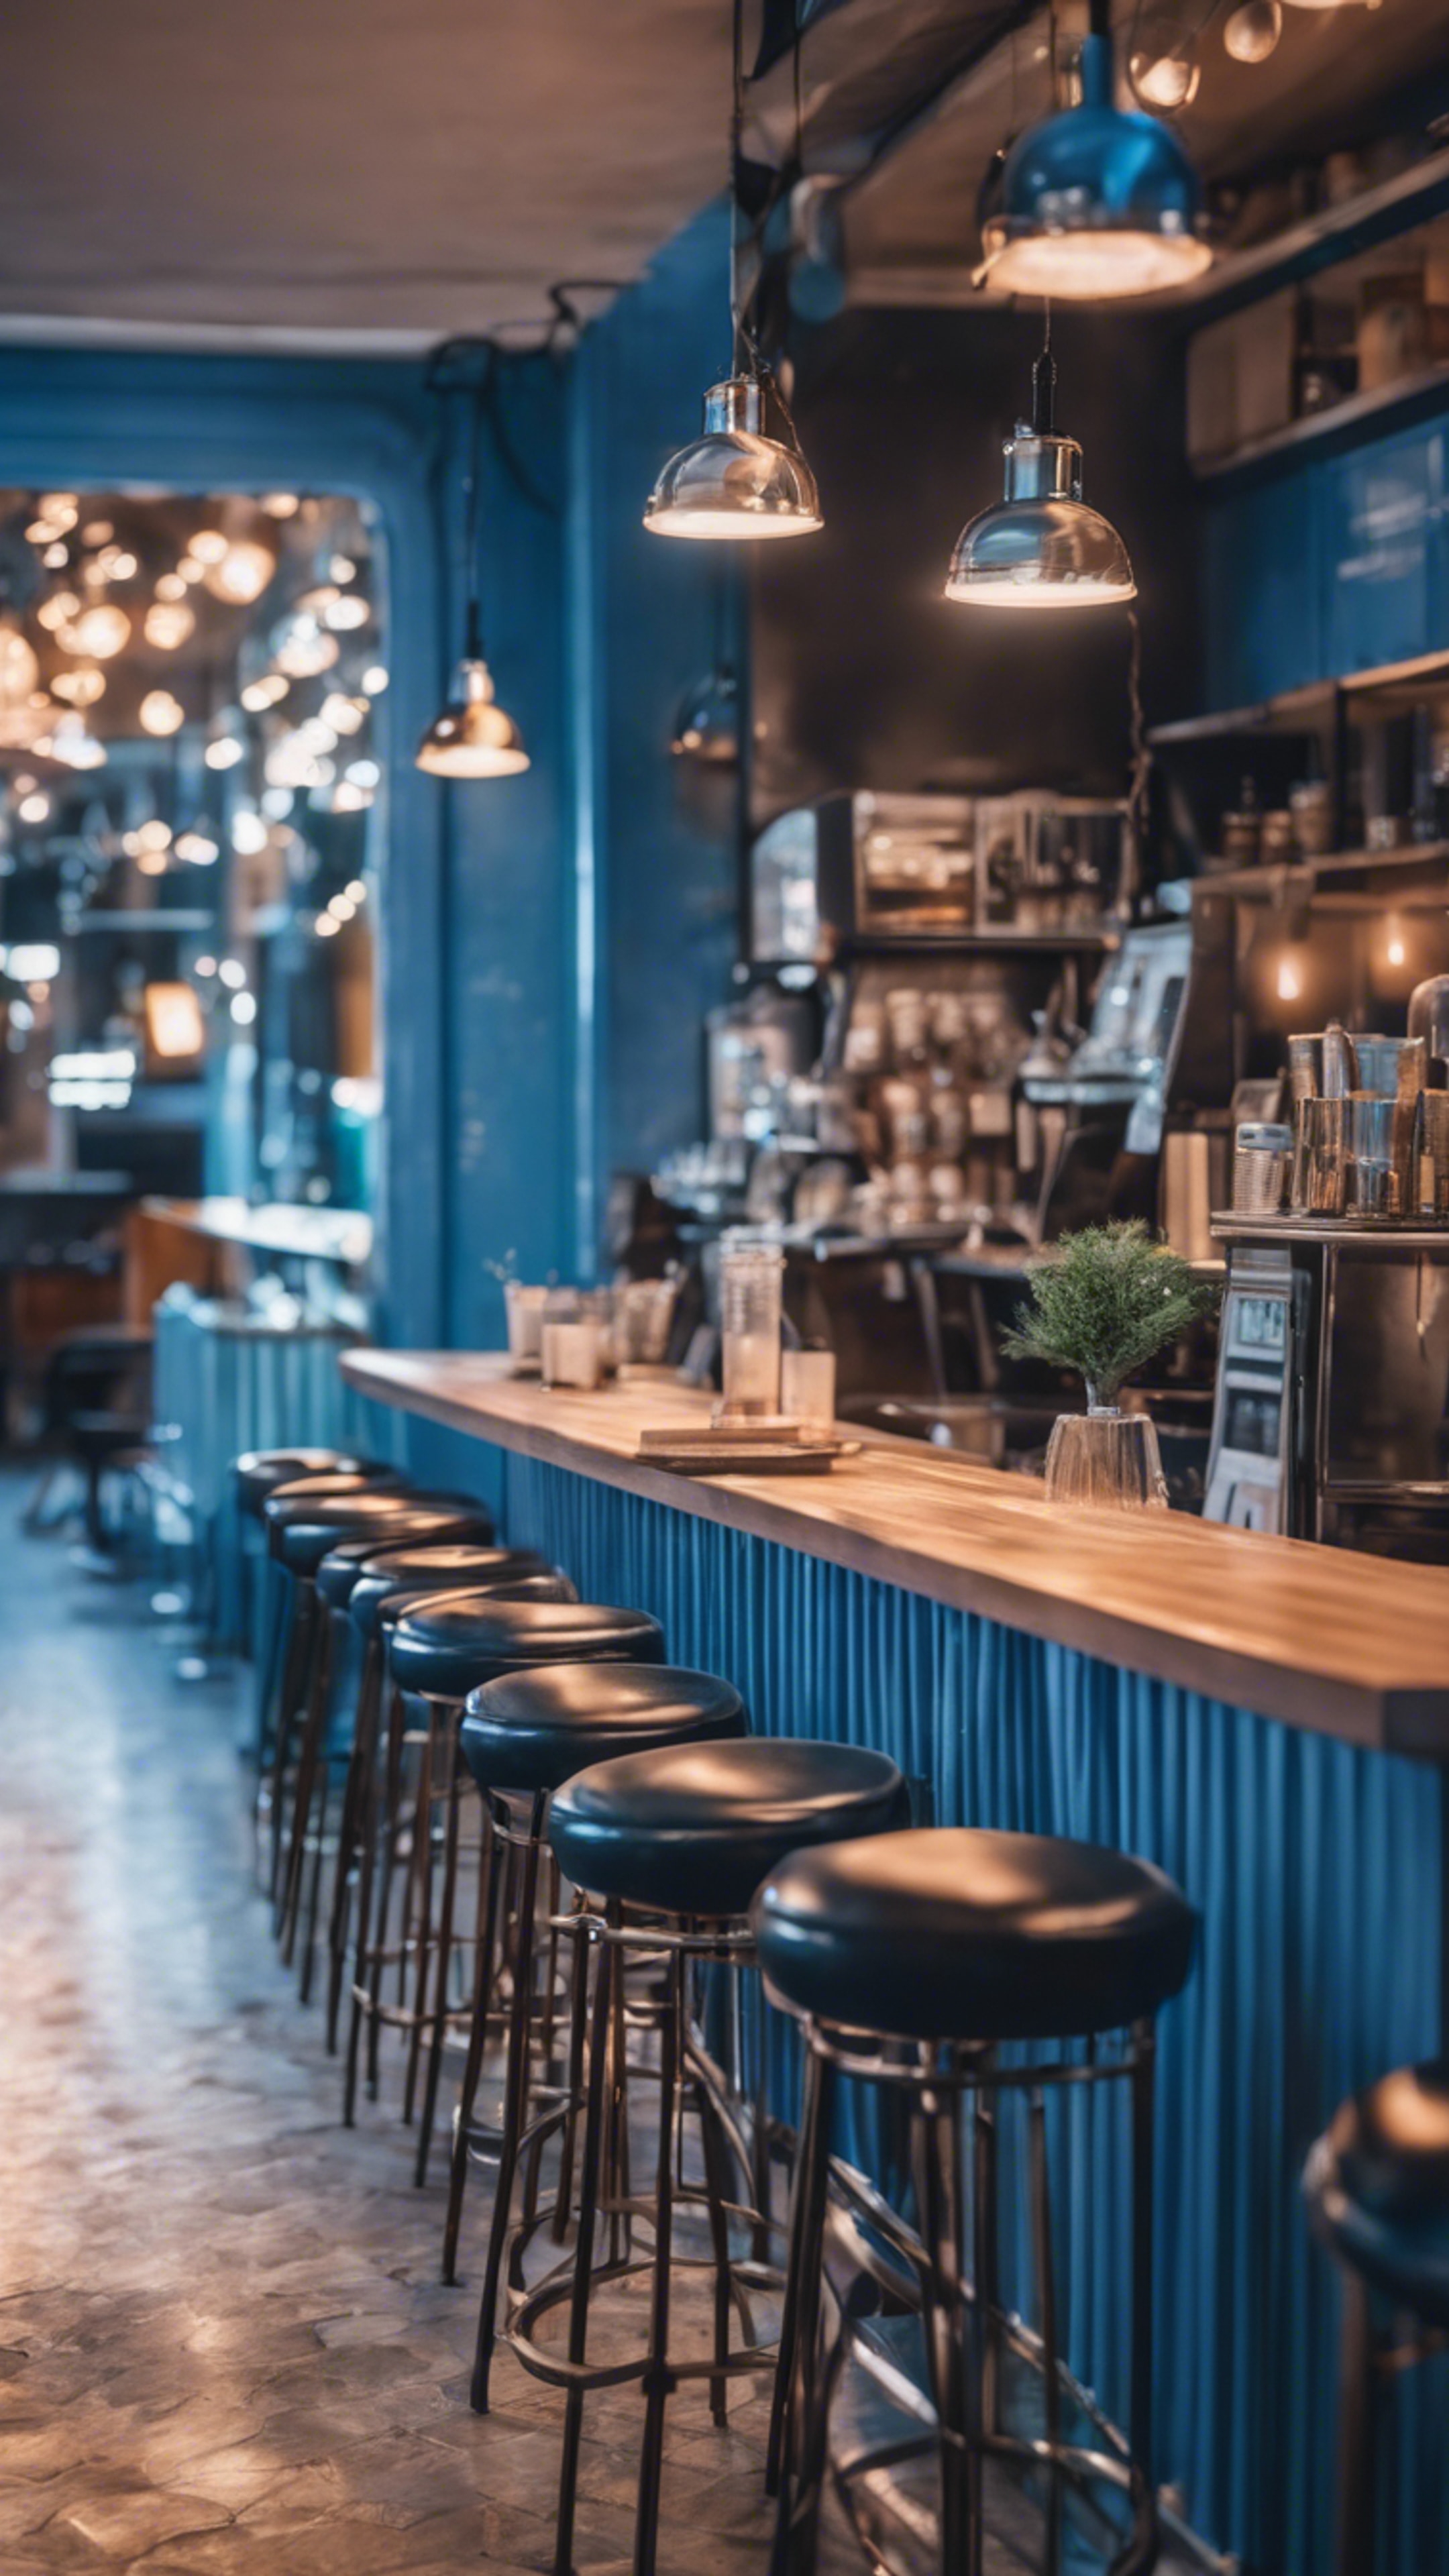 A chic urban cafe with cool blue interiors in the evening Wallpaper[a944bfd98f8948b498de]